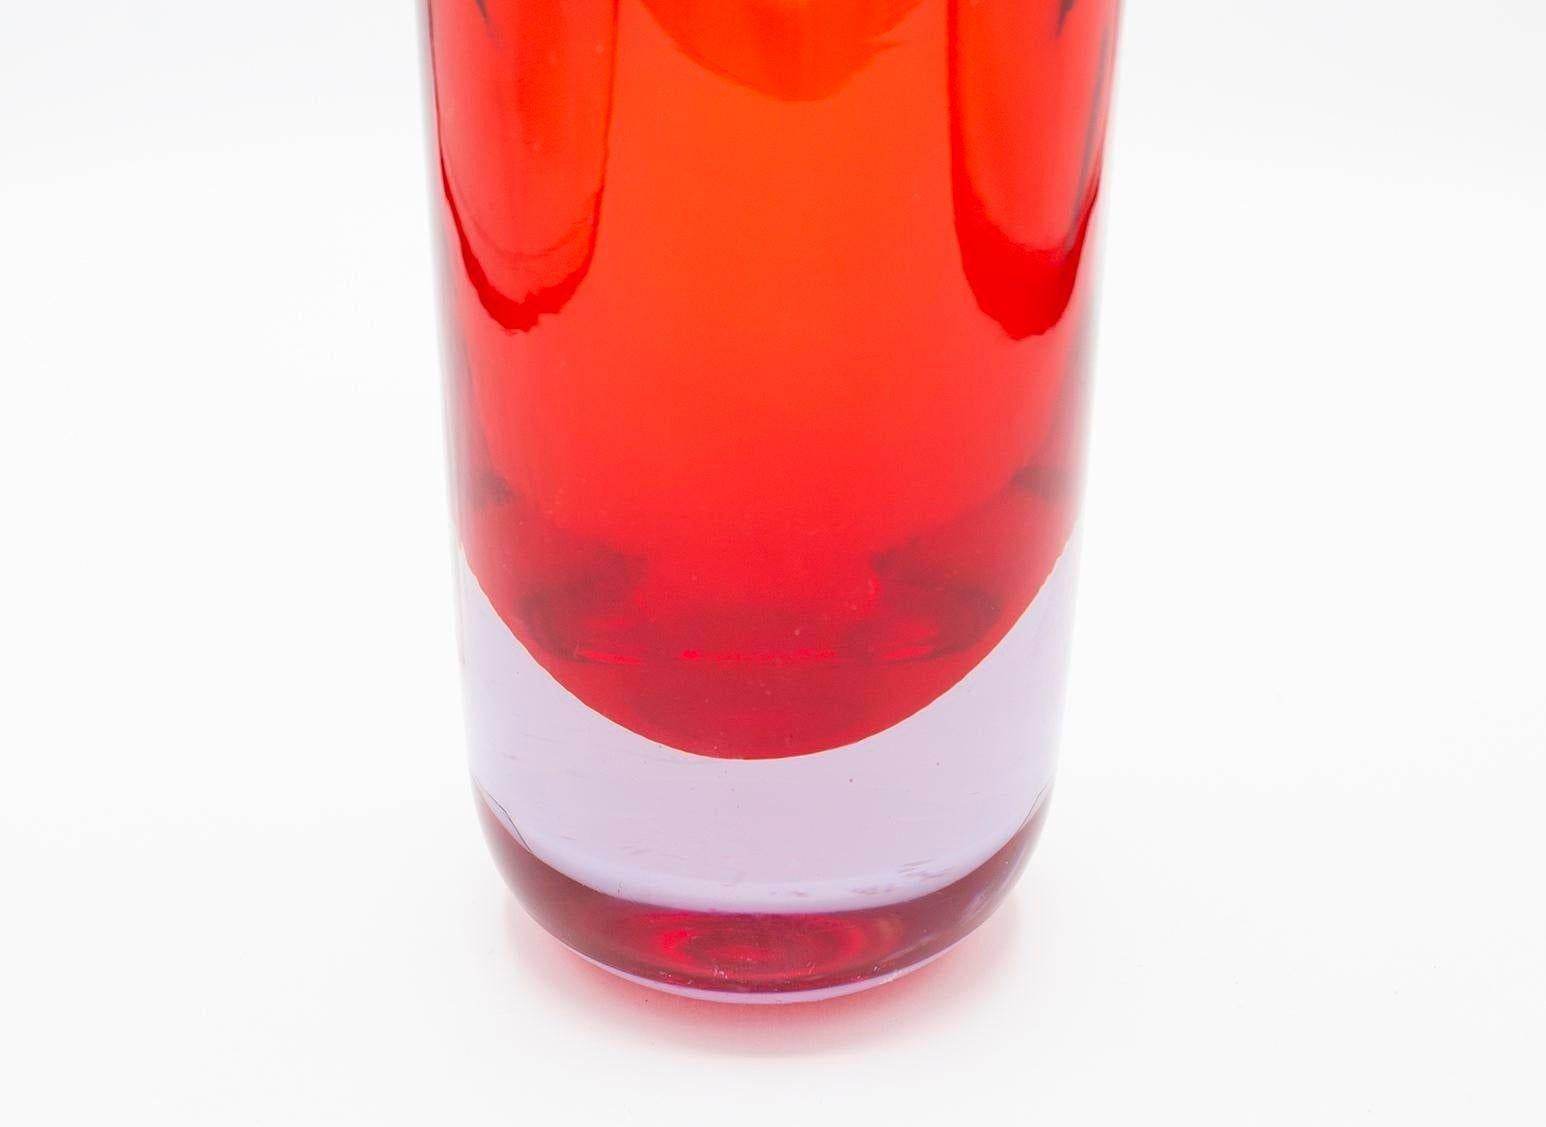 Italy, likely 1960s
This is a beautiful sommerso-style murano glass vase attributed to Seguso. Weighty and substantial in feel, heavy base, reflects light beautifully. Red in color. A beautiful and large piece.
CONDITION NOTES: No chips or cracks.